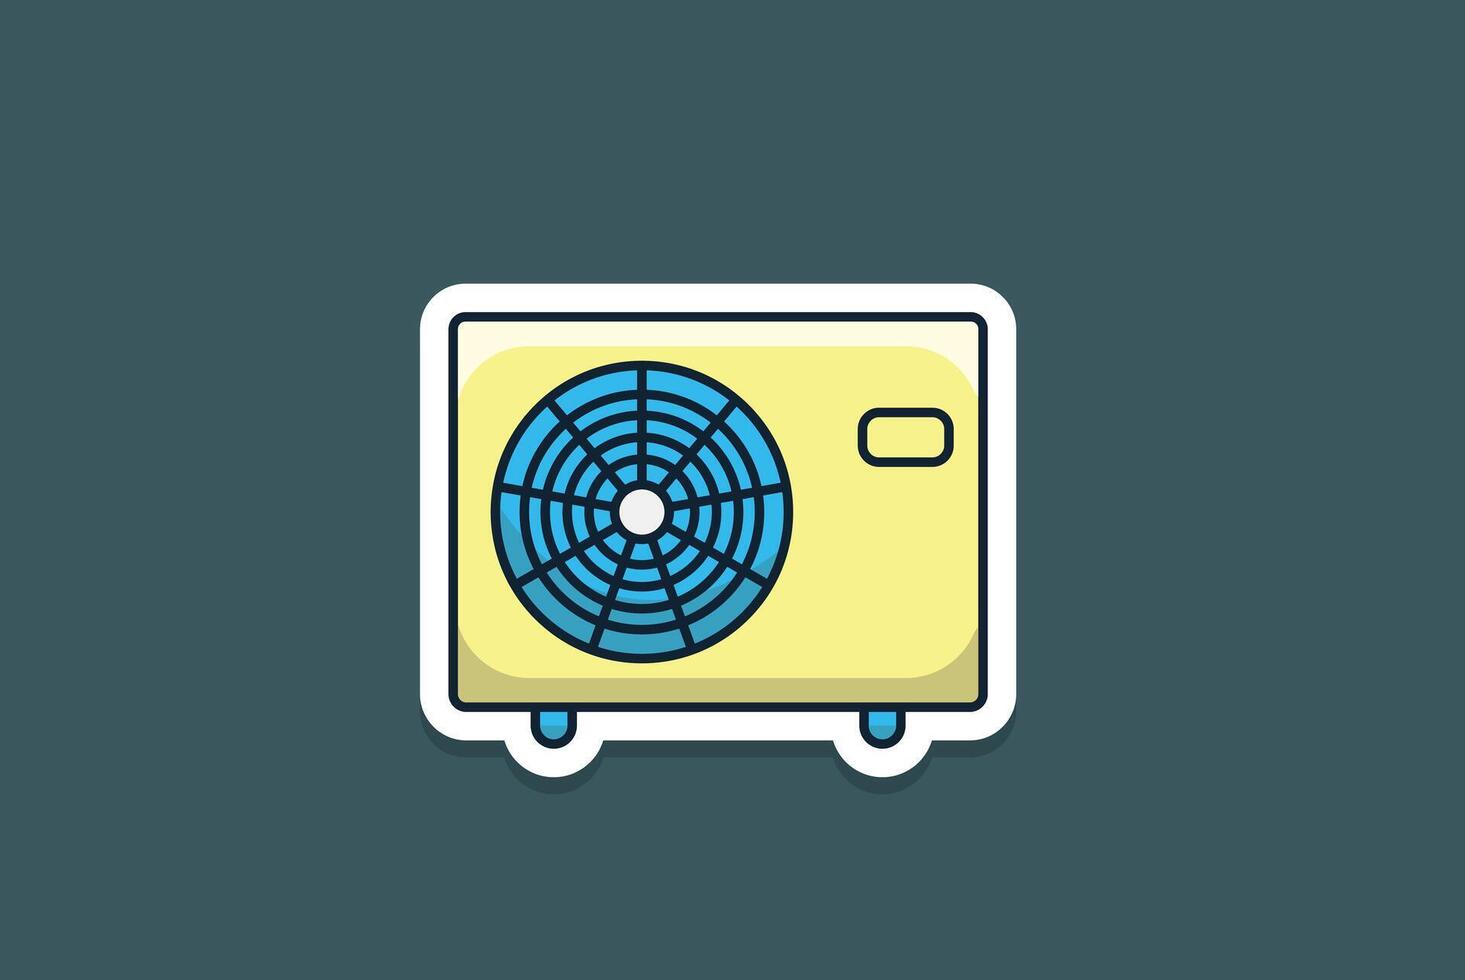 Air Conditioning Ventilator Sticker vector illustration. Technology object icon concept. Various objects of air conditioners-condensing fan sticker vector design.